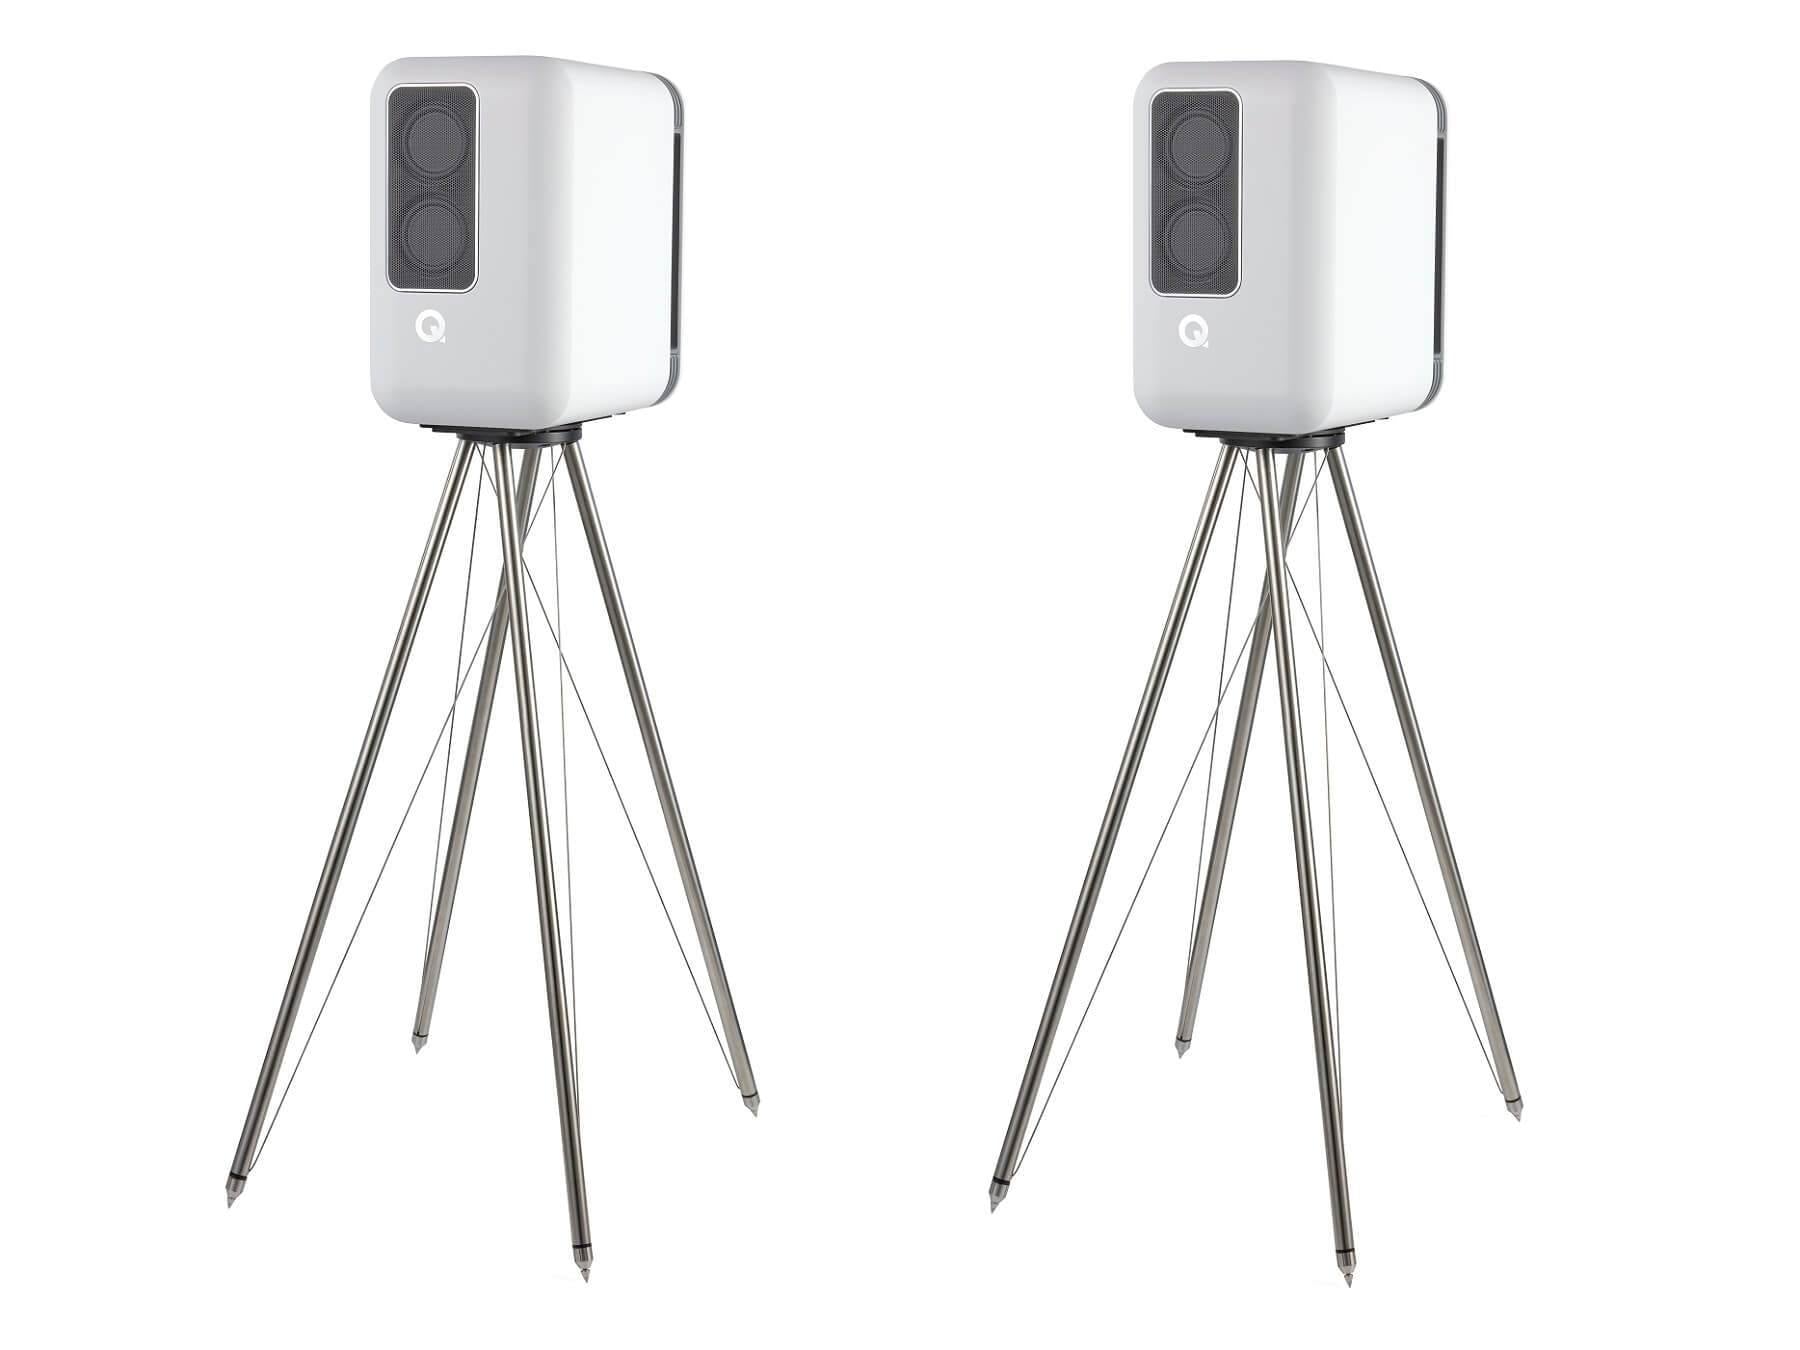 Q Acoustics Q Active 200 - White Speakers and Stands